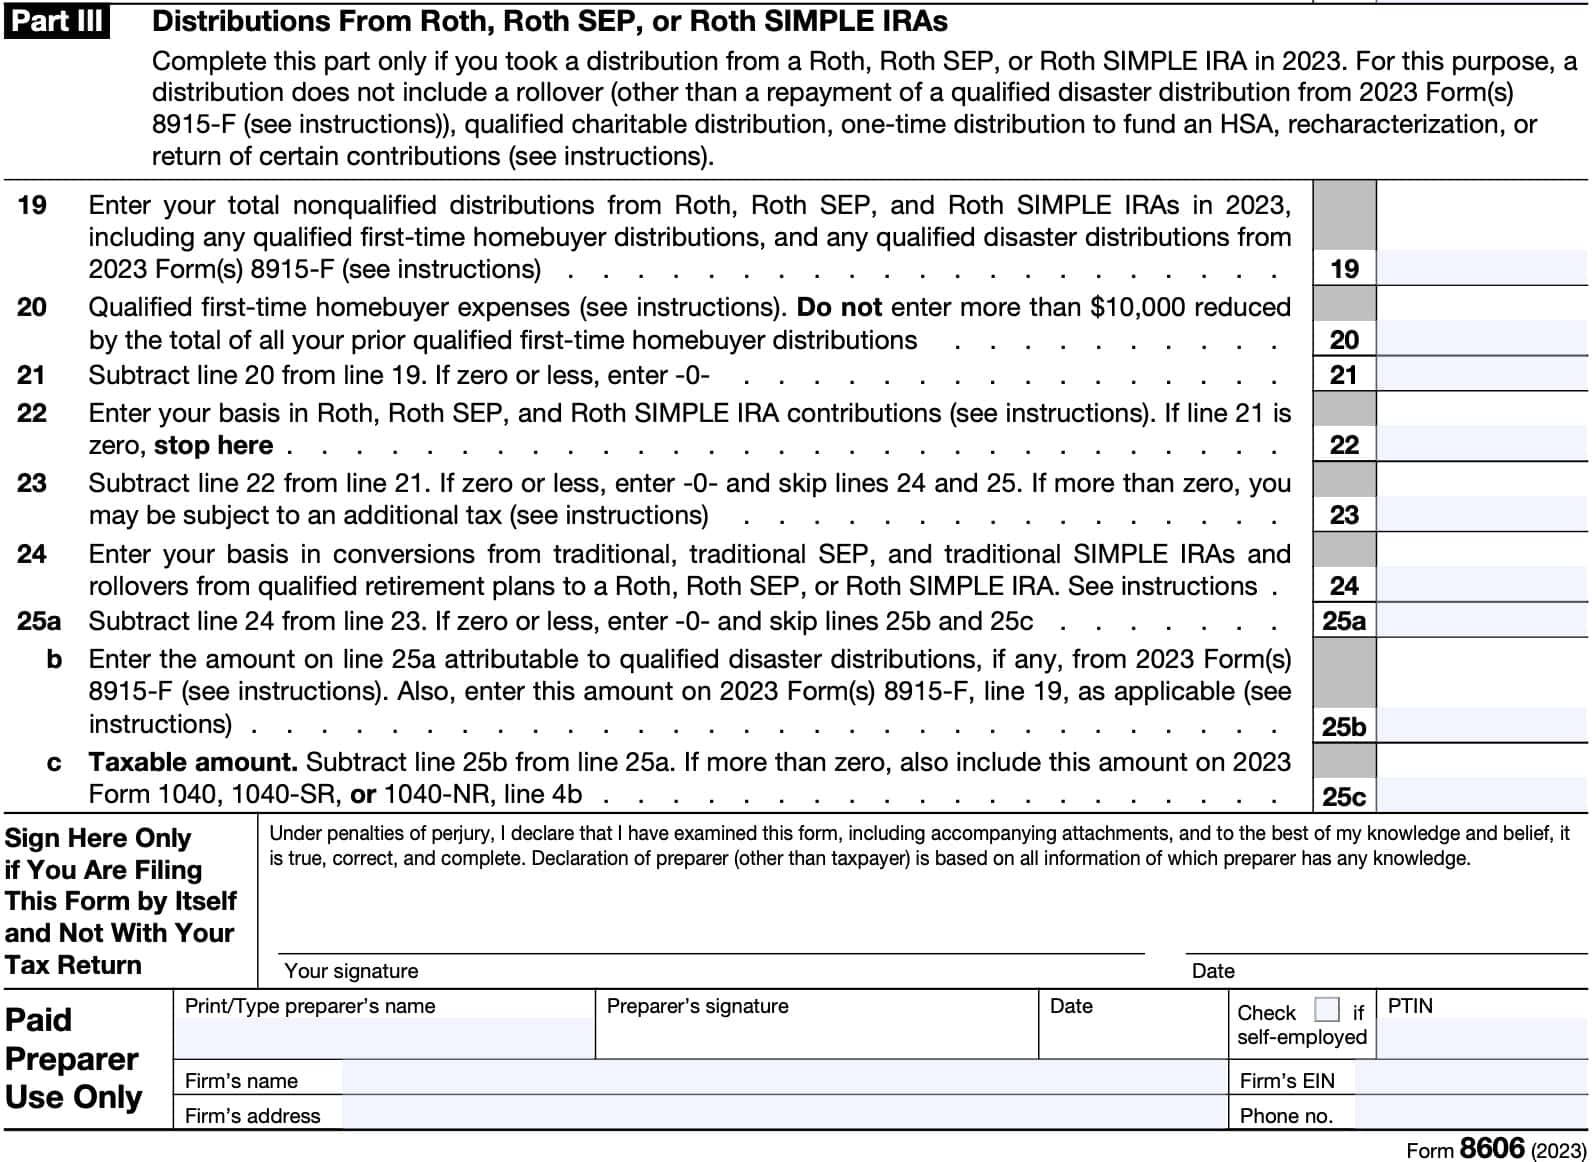 irs form 8606 part iii, distributions from roth iras